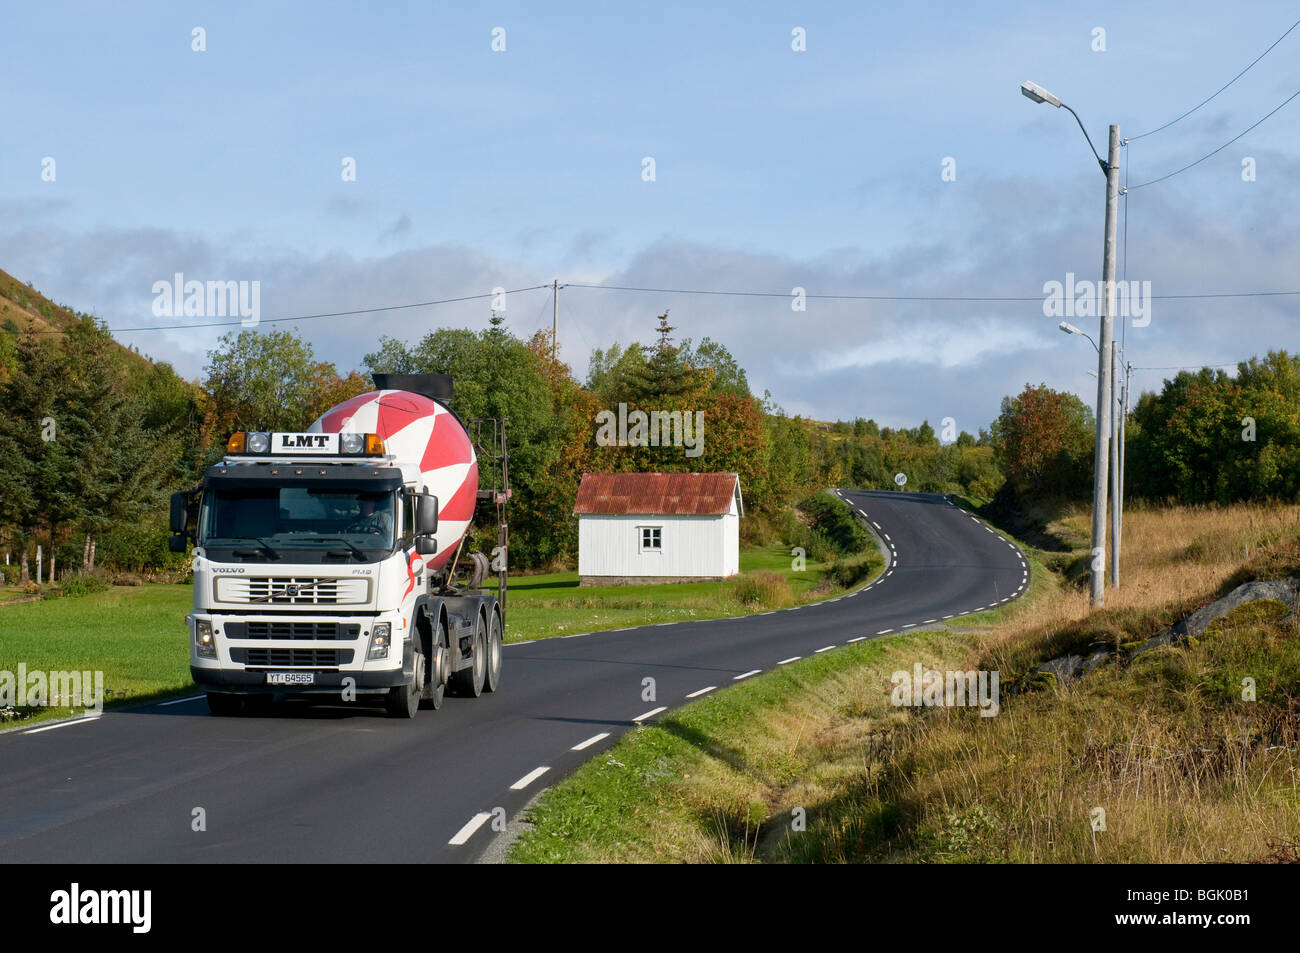 Narrow and curvy road with a large vehicle, a concrete lorry Stock Photo